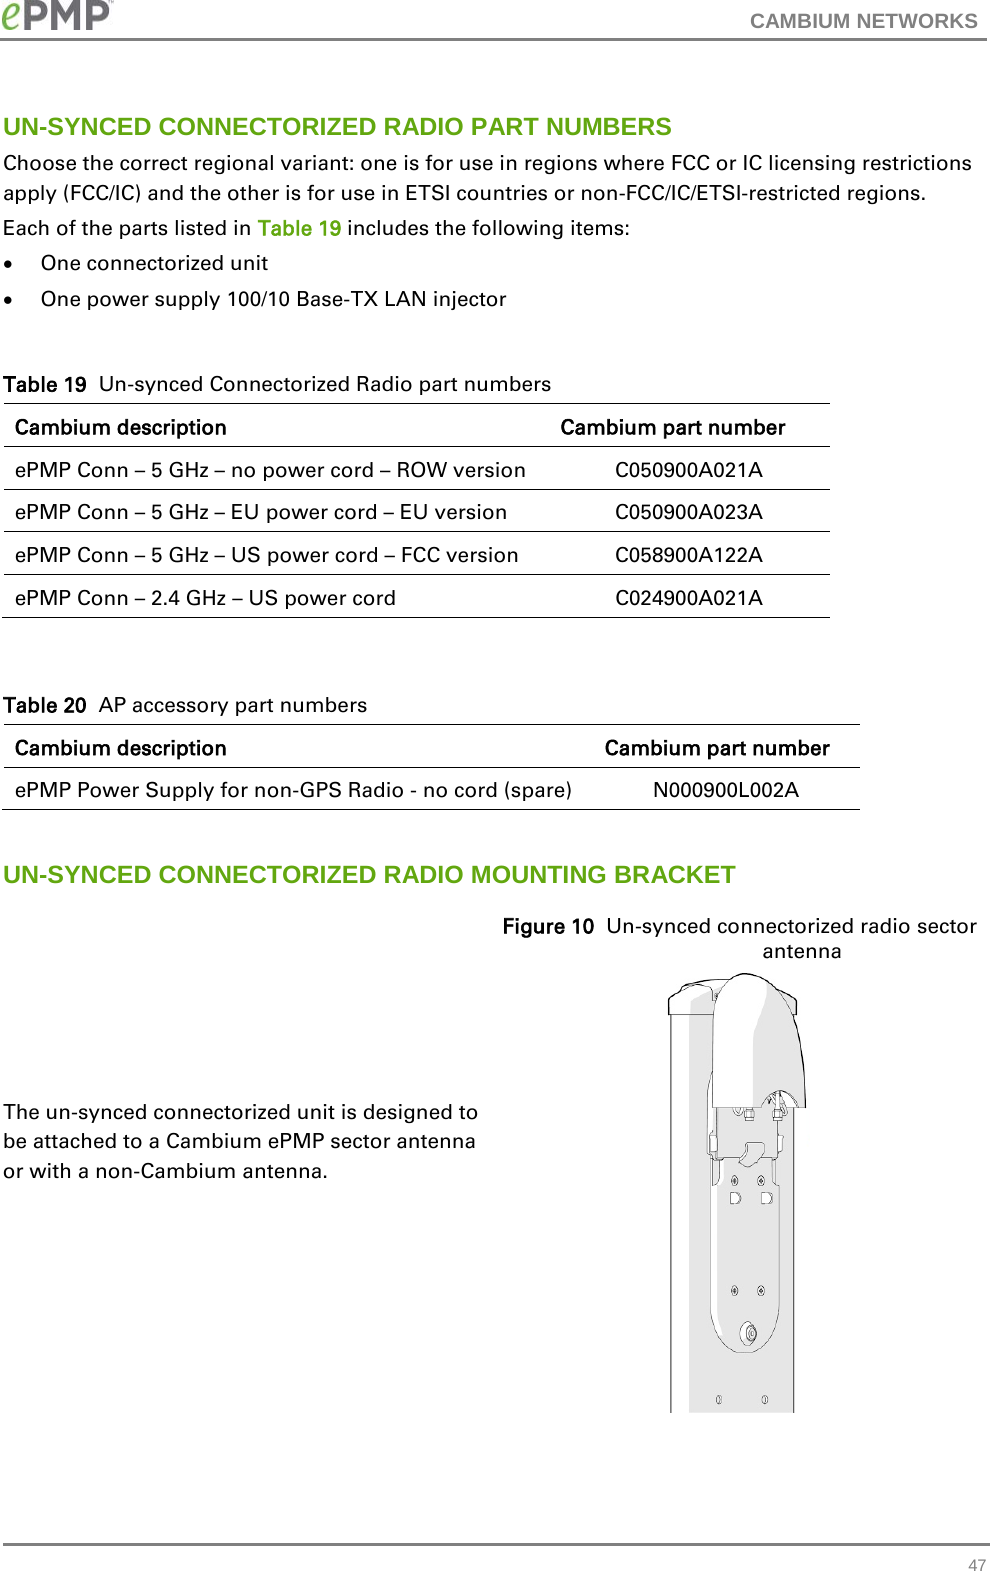 CAMBIUM NETWORKS  UN-SYNCED CONNECTORIZED RADIO PART NUMBERS Choose the correct regional variant: one is for use in regions where FCC or IC licensing restrictions apply (FCC/IC) and the other is for use in ETSI countries or non-FCC/IC/ETSI-restricted regions. Each of the parts listed in Table 19 includes the following items: • One connectorized unit • One power supply 100/10 Base-TX LAN injector  Table 19  Un-synced Connectorized Radio part numbers Cambium description Cambium part number ePMP Conn – 5 GHz – no power cord – ROW version C050900A021A ePMP Conn – 5 GHz – EU power cord – EU version C050900A023A ePMP Conn – 5 GHz – US power cord – FCC version C058900A122A ePMP Conn – 2.4 GHz – US power cord C024900A021A  Table 20  AP accessory part numbers Cambium description Cambium part number ePMP Power Supply for non-GPS Radio - no cord (spare) N000900L002A  UN-SYNCED CONNECTORIZED RADIO MOUNTING BRACKET The un-synced connectorized unit is designed to be attached to a Cambium ePMP sector antenna or with a non-Cambium antenna.  Figure 10  Un-synced connectorized radio sector antenna     47 